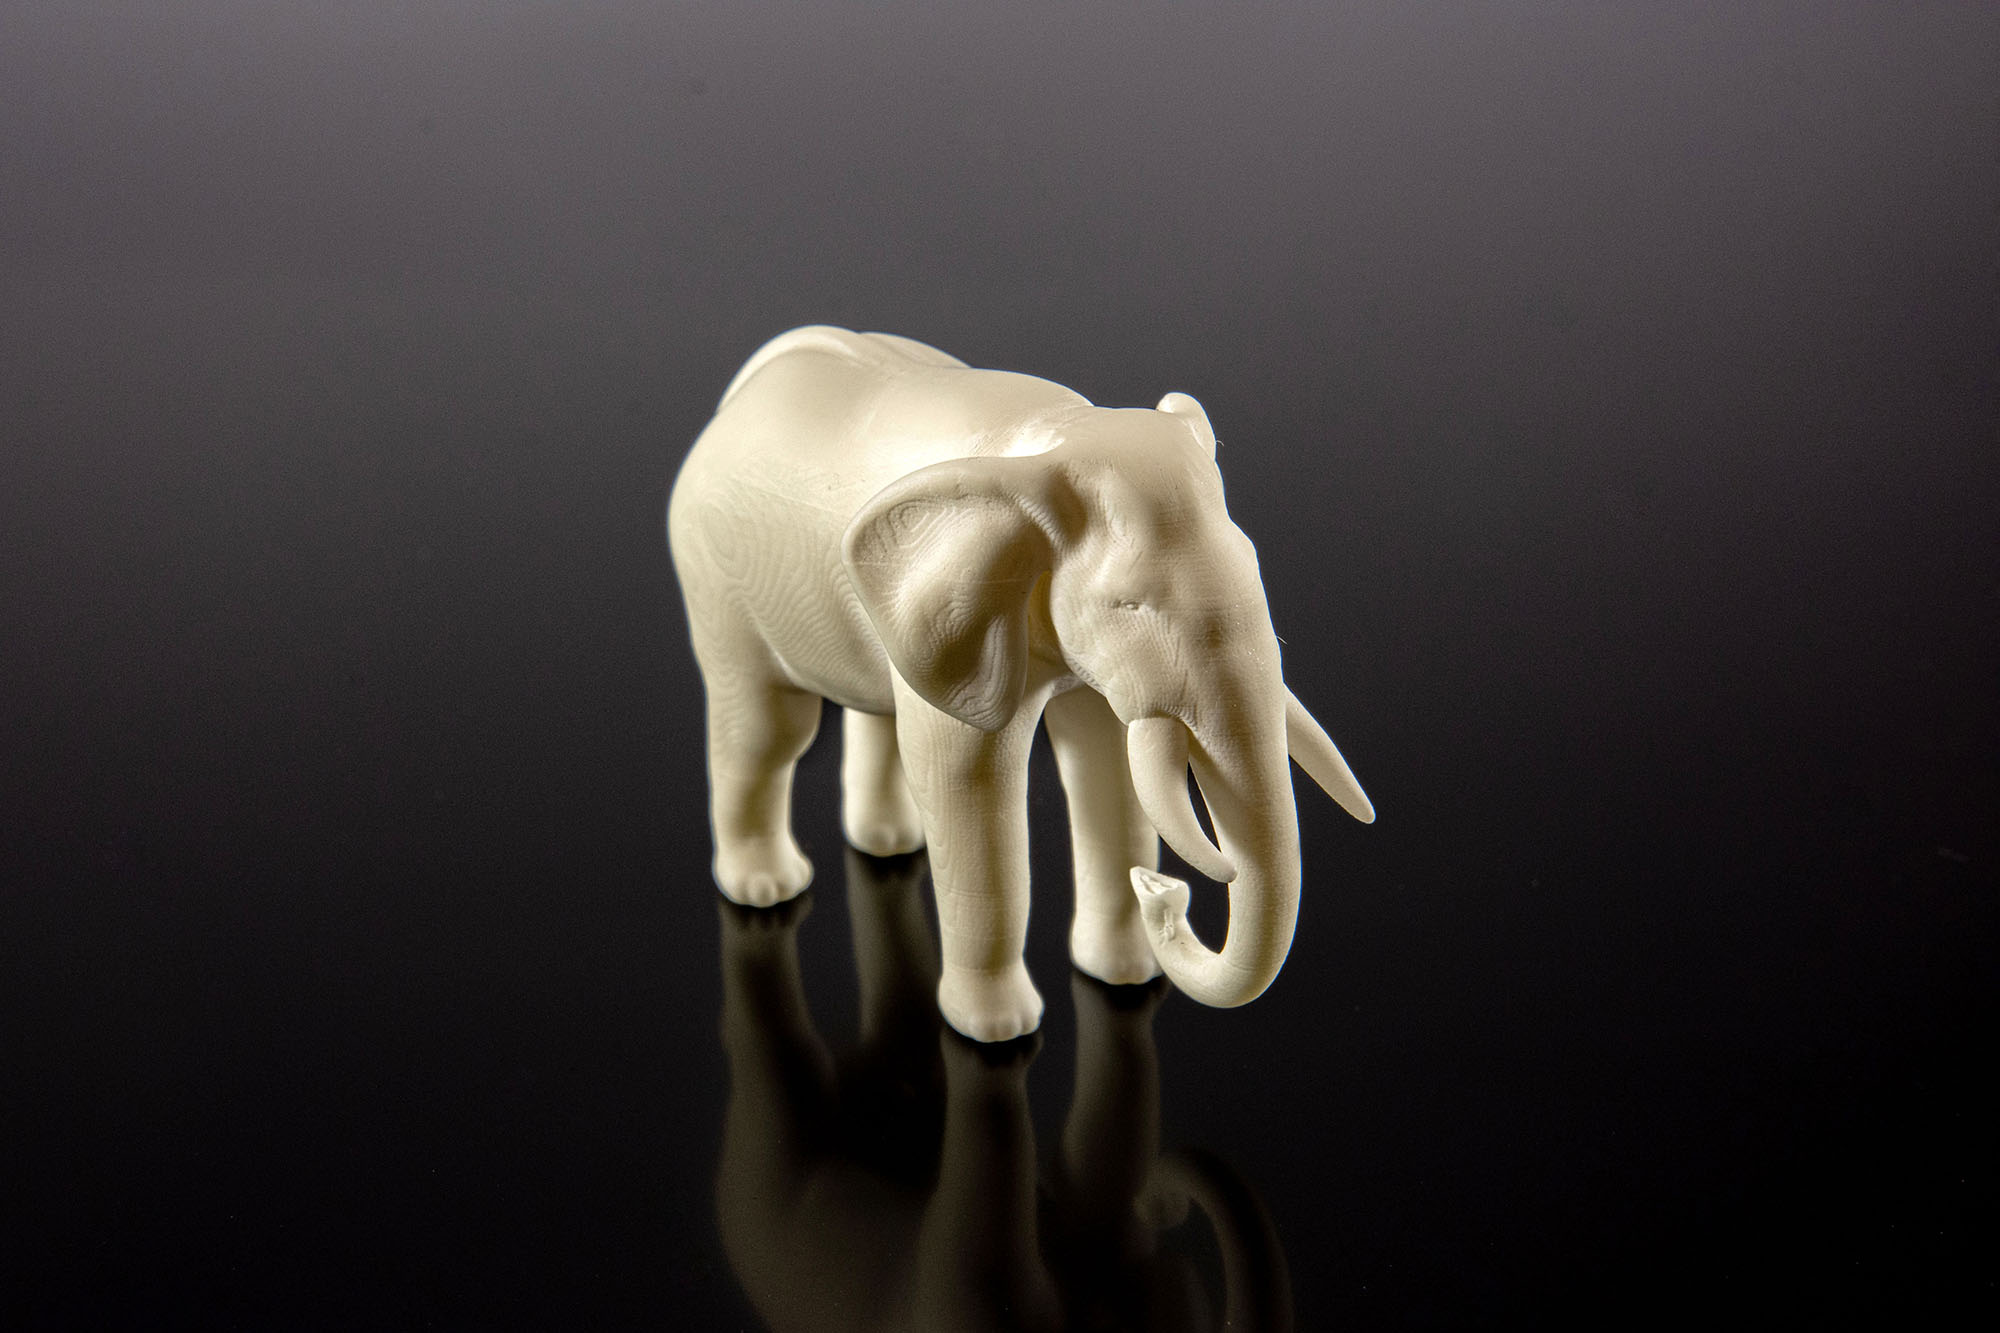 New 3D Printed Could Curb Digital Trends